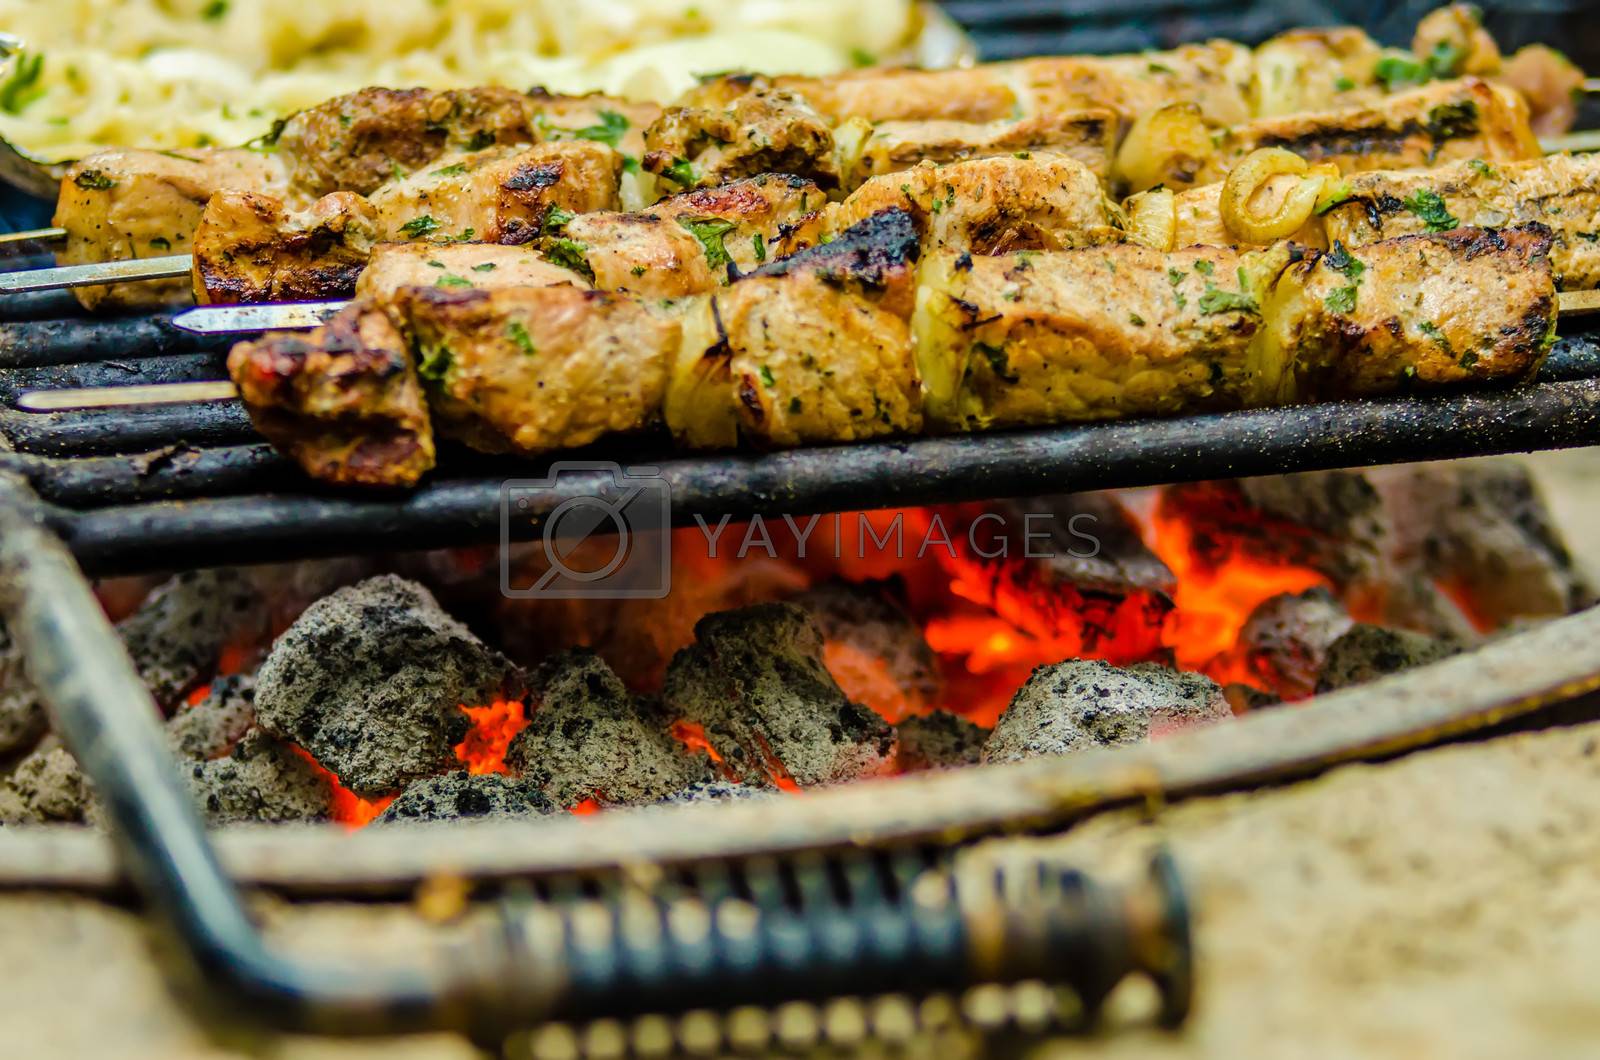 Royalty free image of beef kababs on the grill closeup by digidreamgrafix